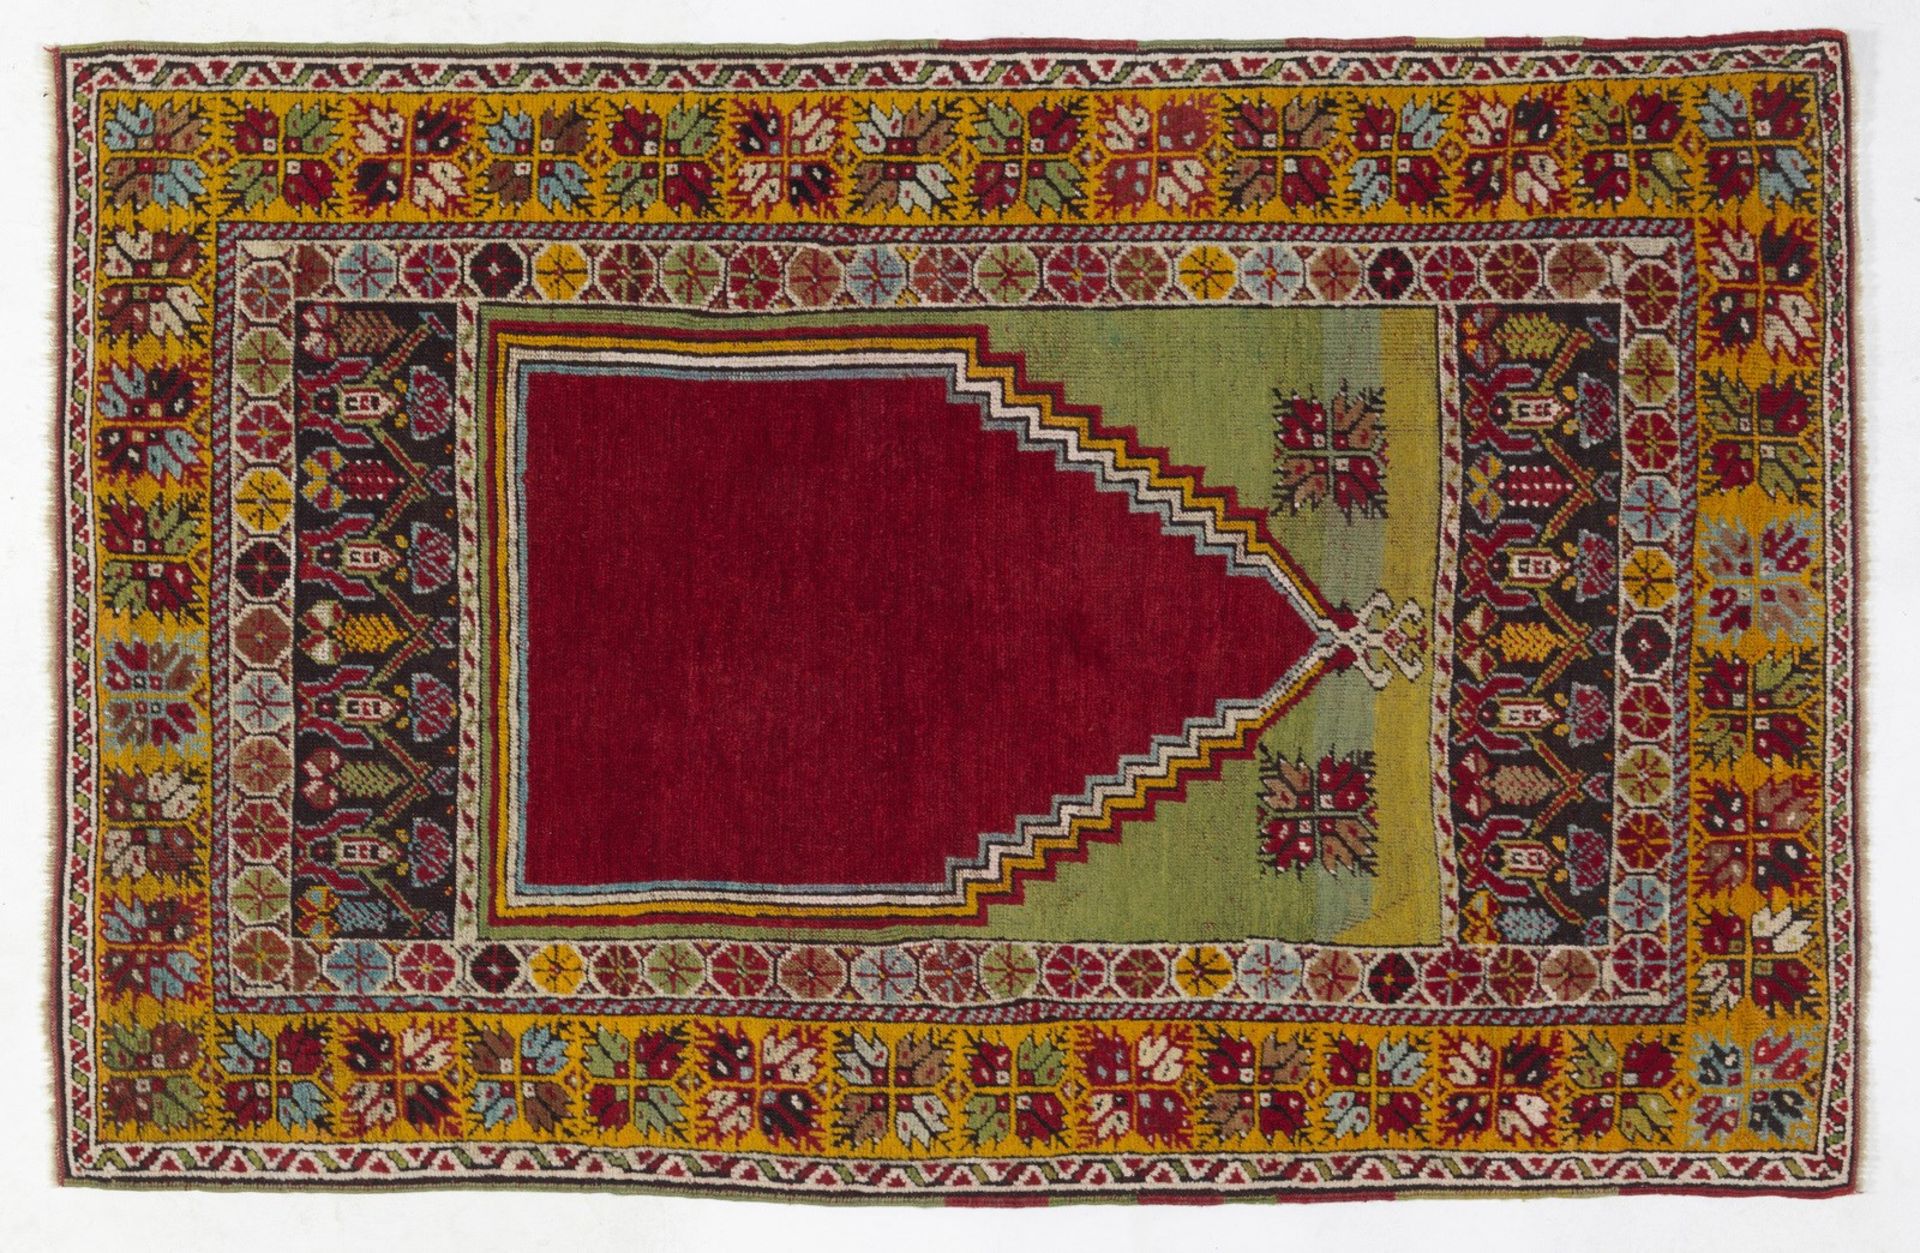 KONIA Hand-knotted and hand-worked carpet, origin Anatolia, end of the 19th century.